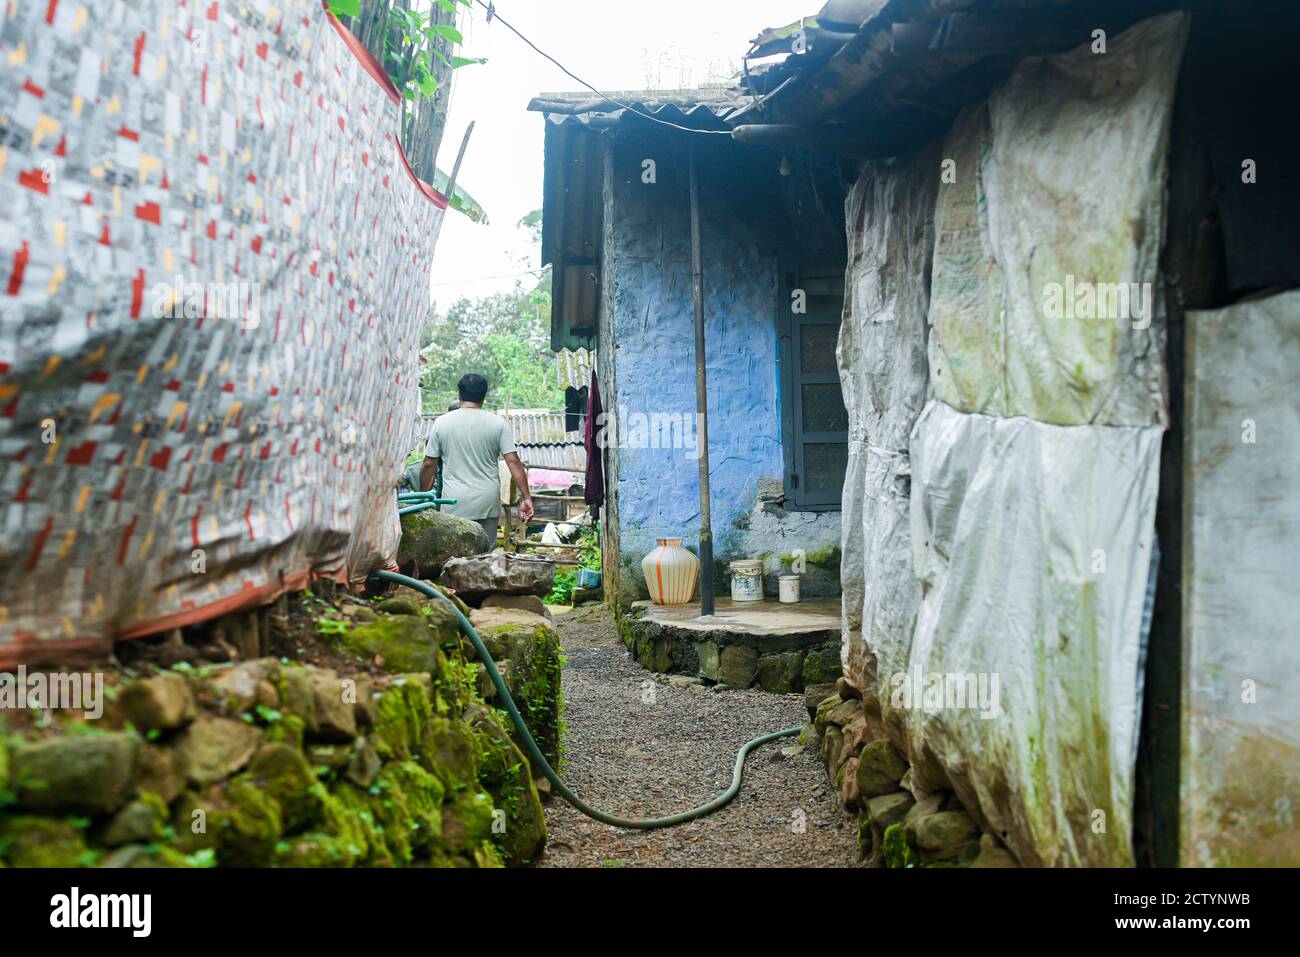 A rural house made of bricks and mud in India with many people living together. India Kerala Tamil Nadu  street life photography. Stock Photo